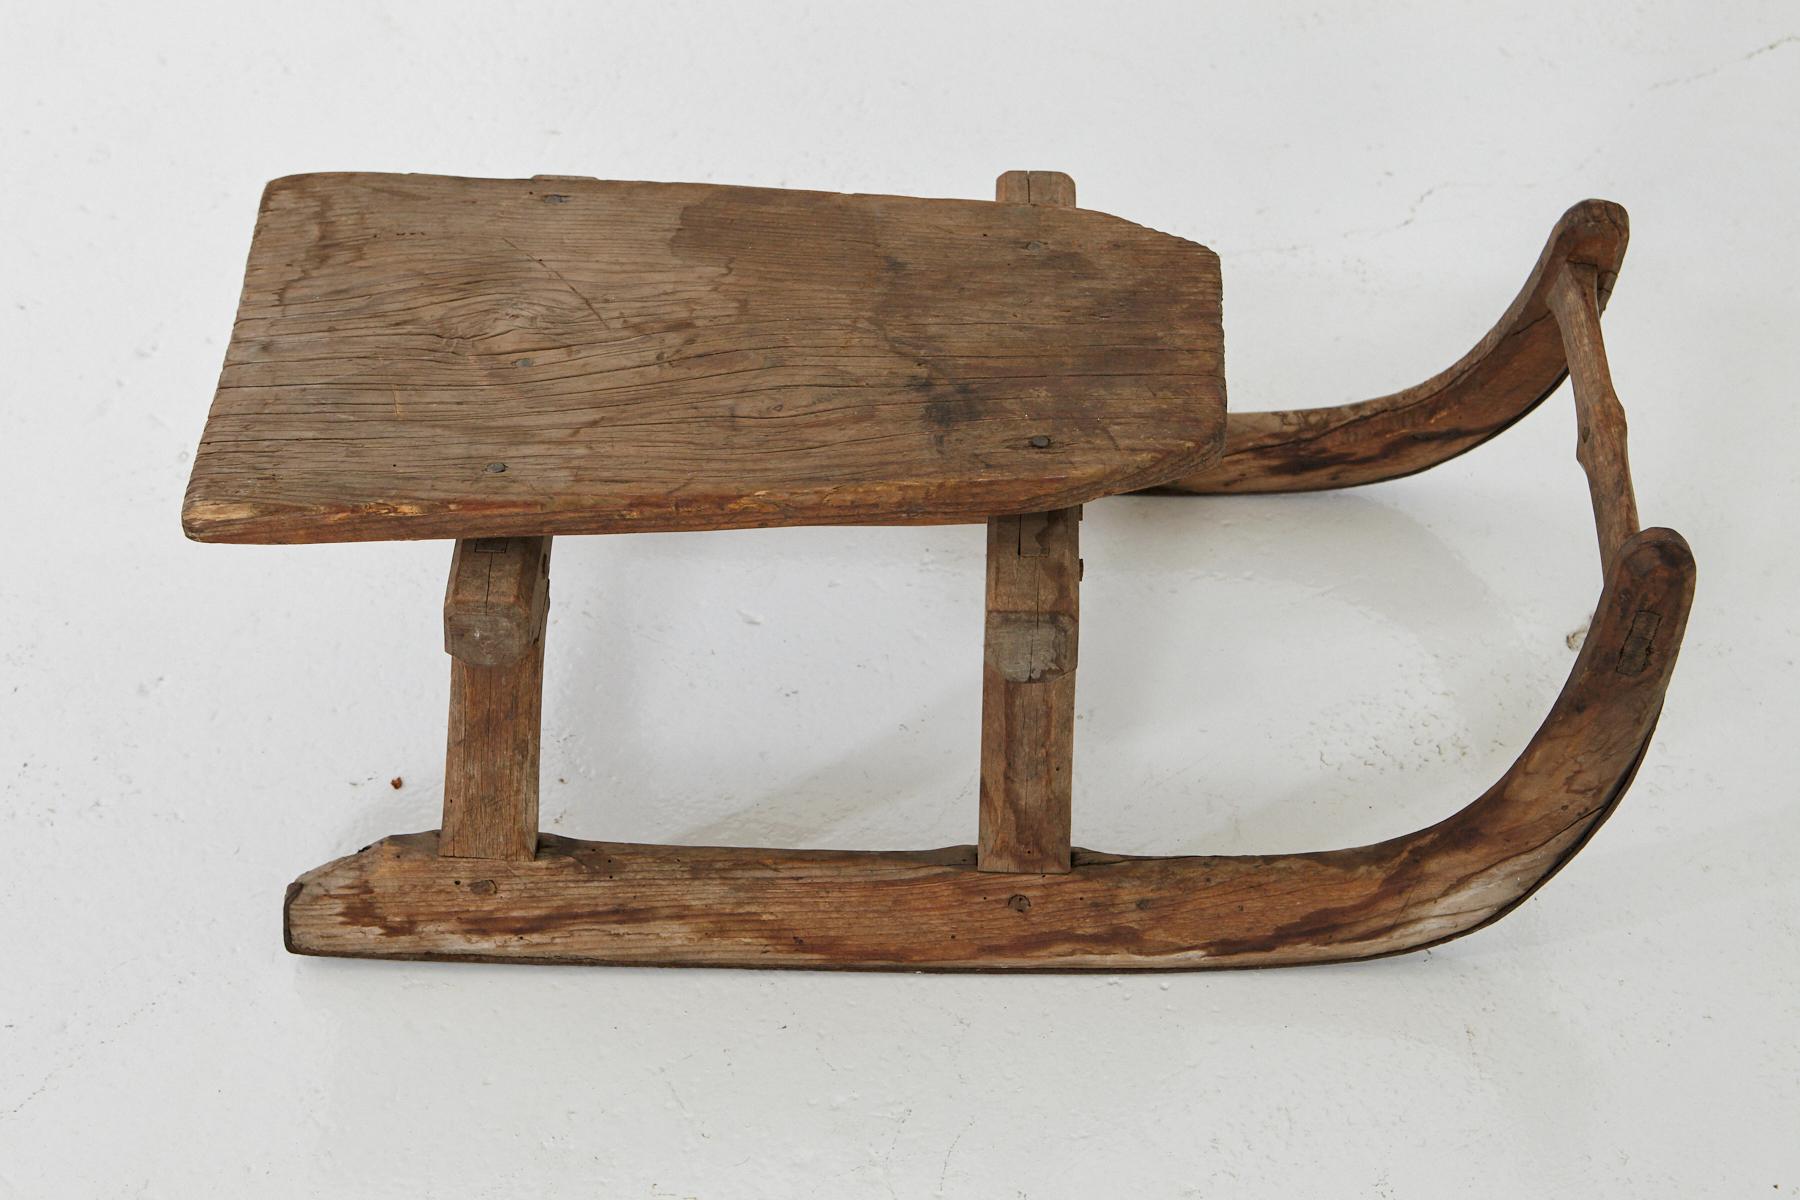 Lovely hand carved primitive, puristic wooden sleigh for one person, probably end of the19th century.
The sleigh has a beautiful, silverish weathered patina.
Very solid and sturdy construction, still usable.